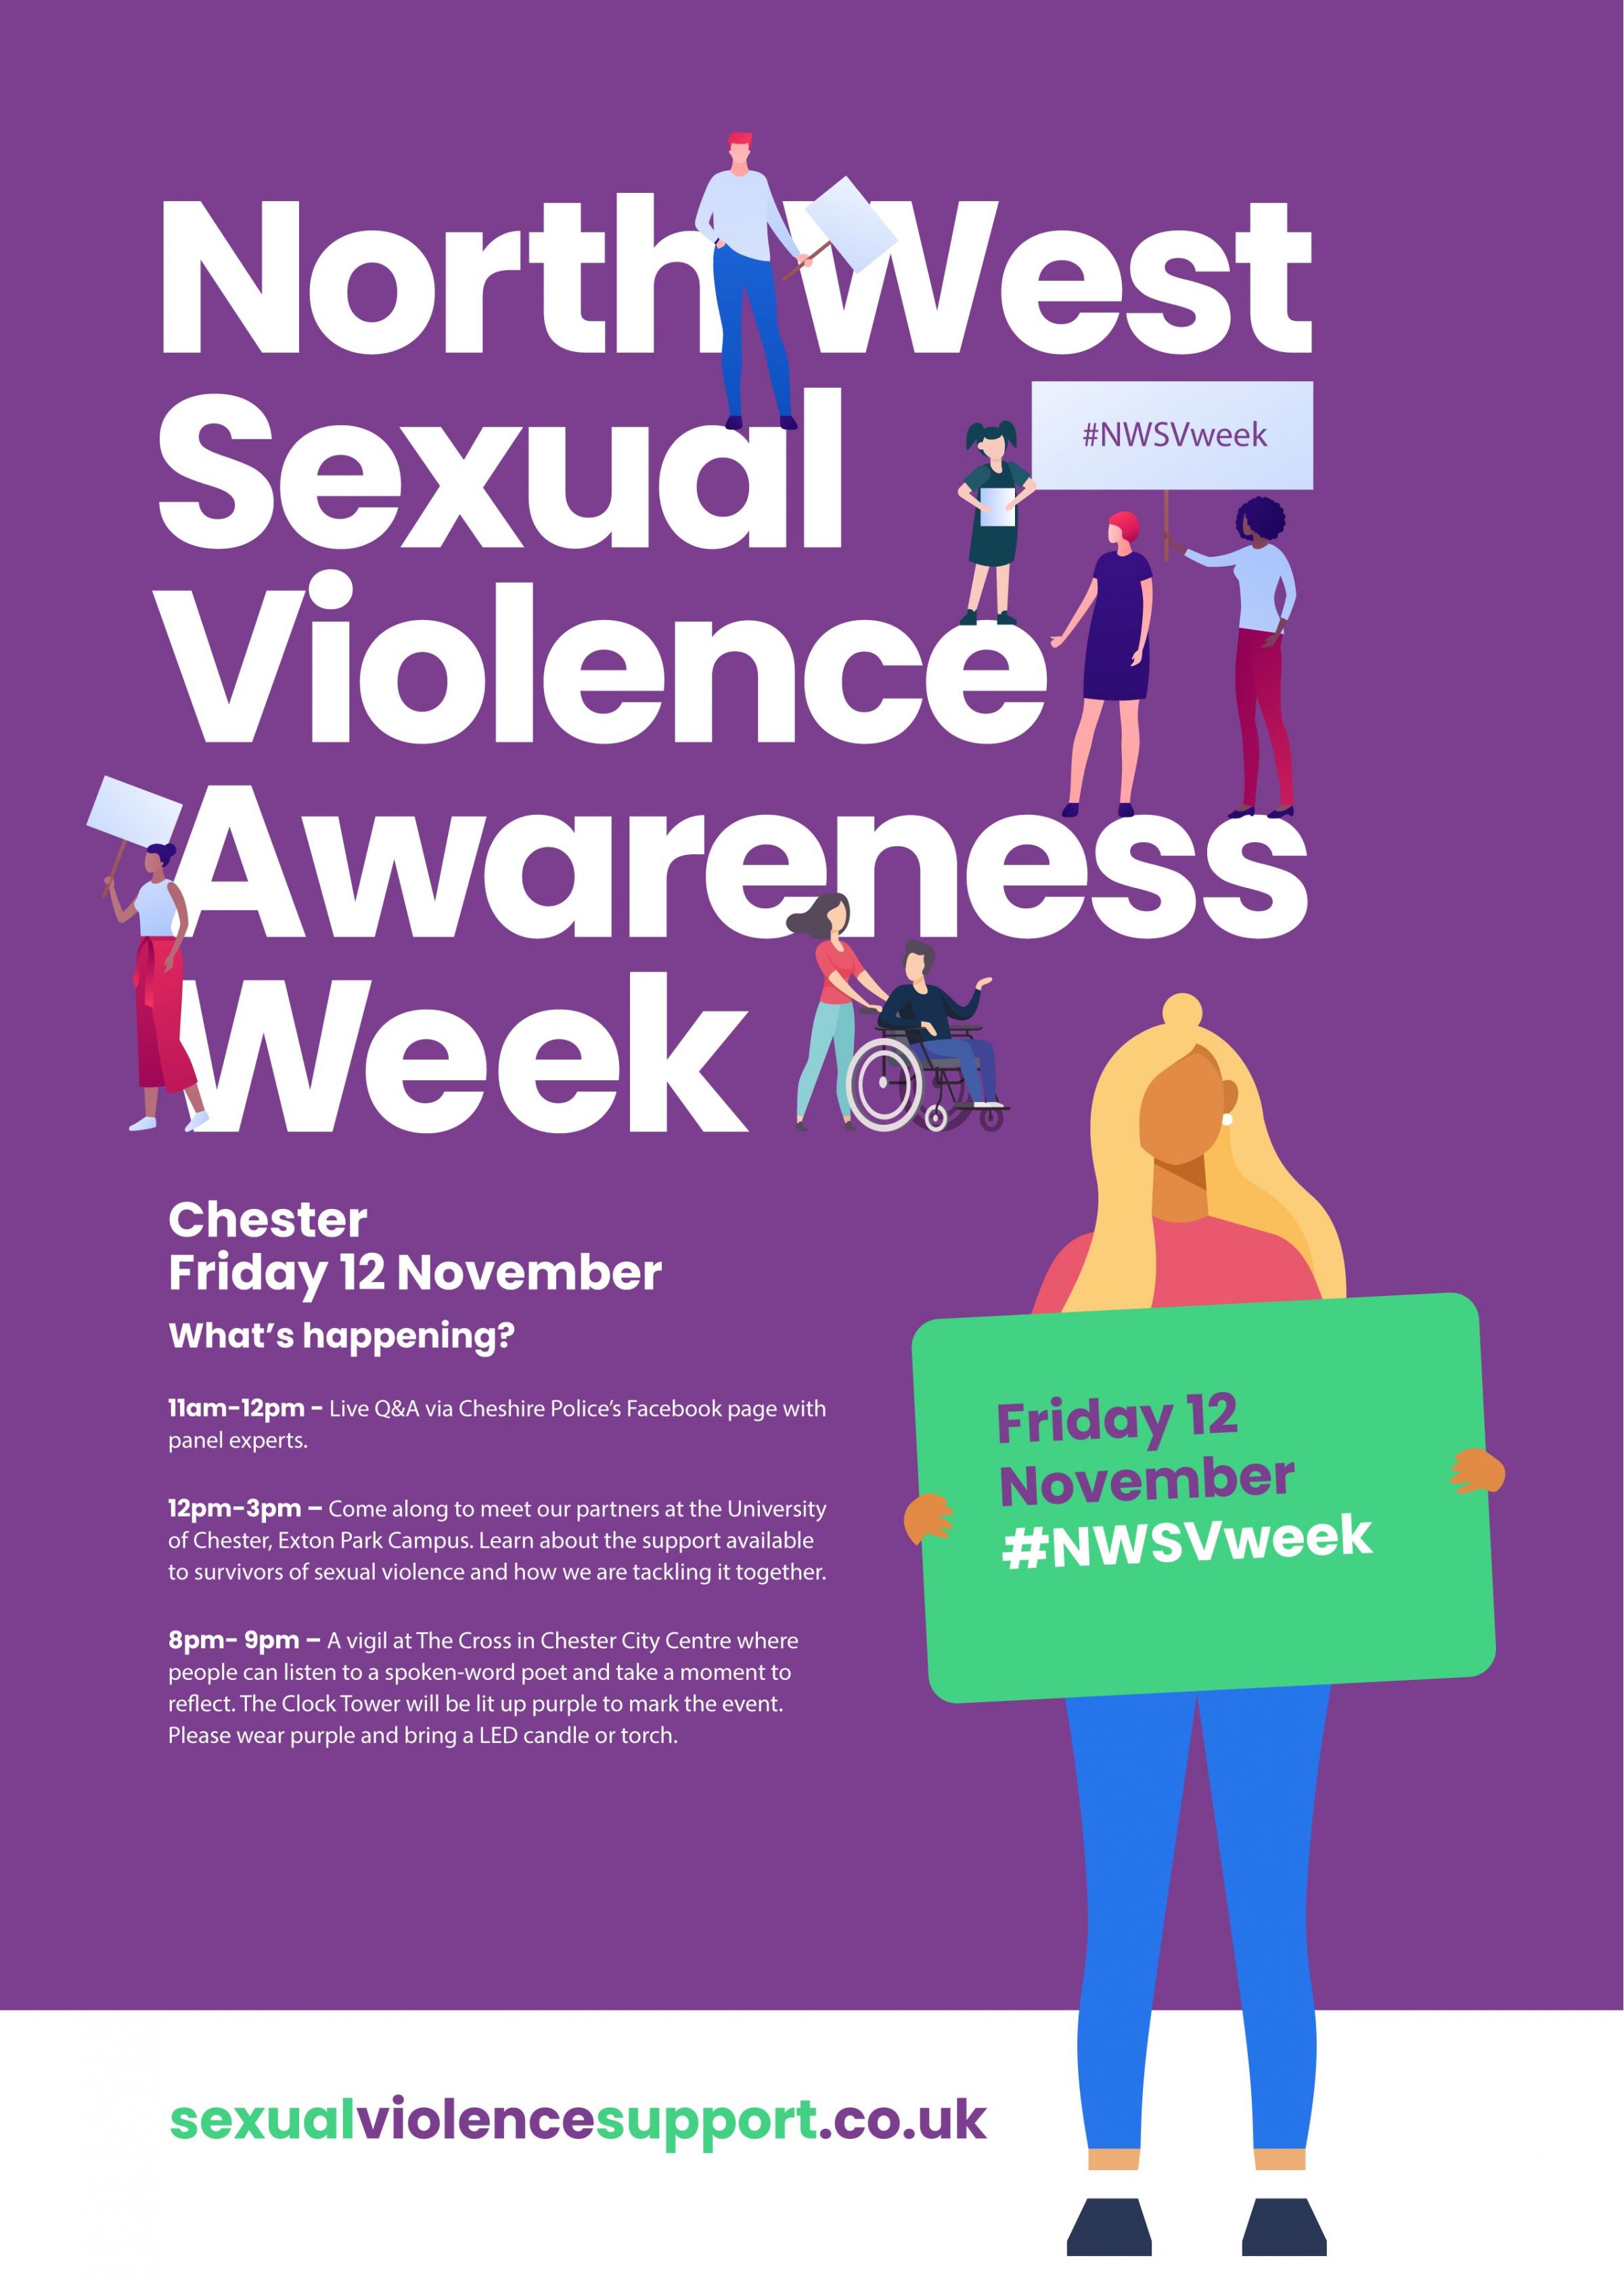 The North West Sexual Violence Awareness Week is running throughout this week.